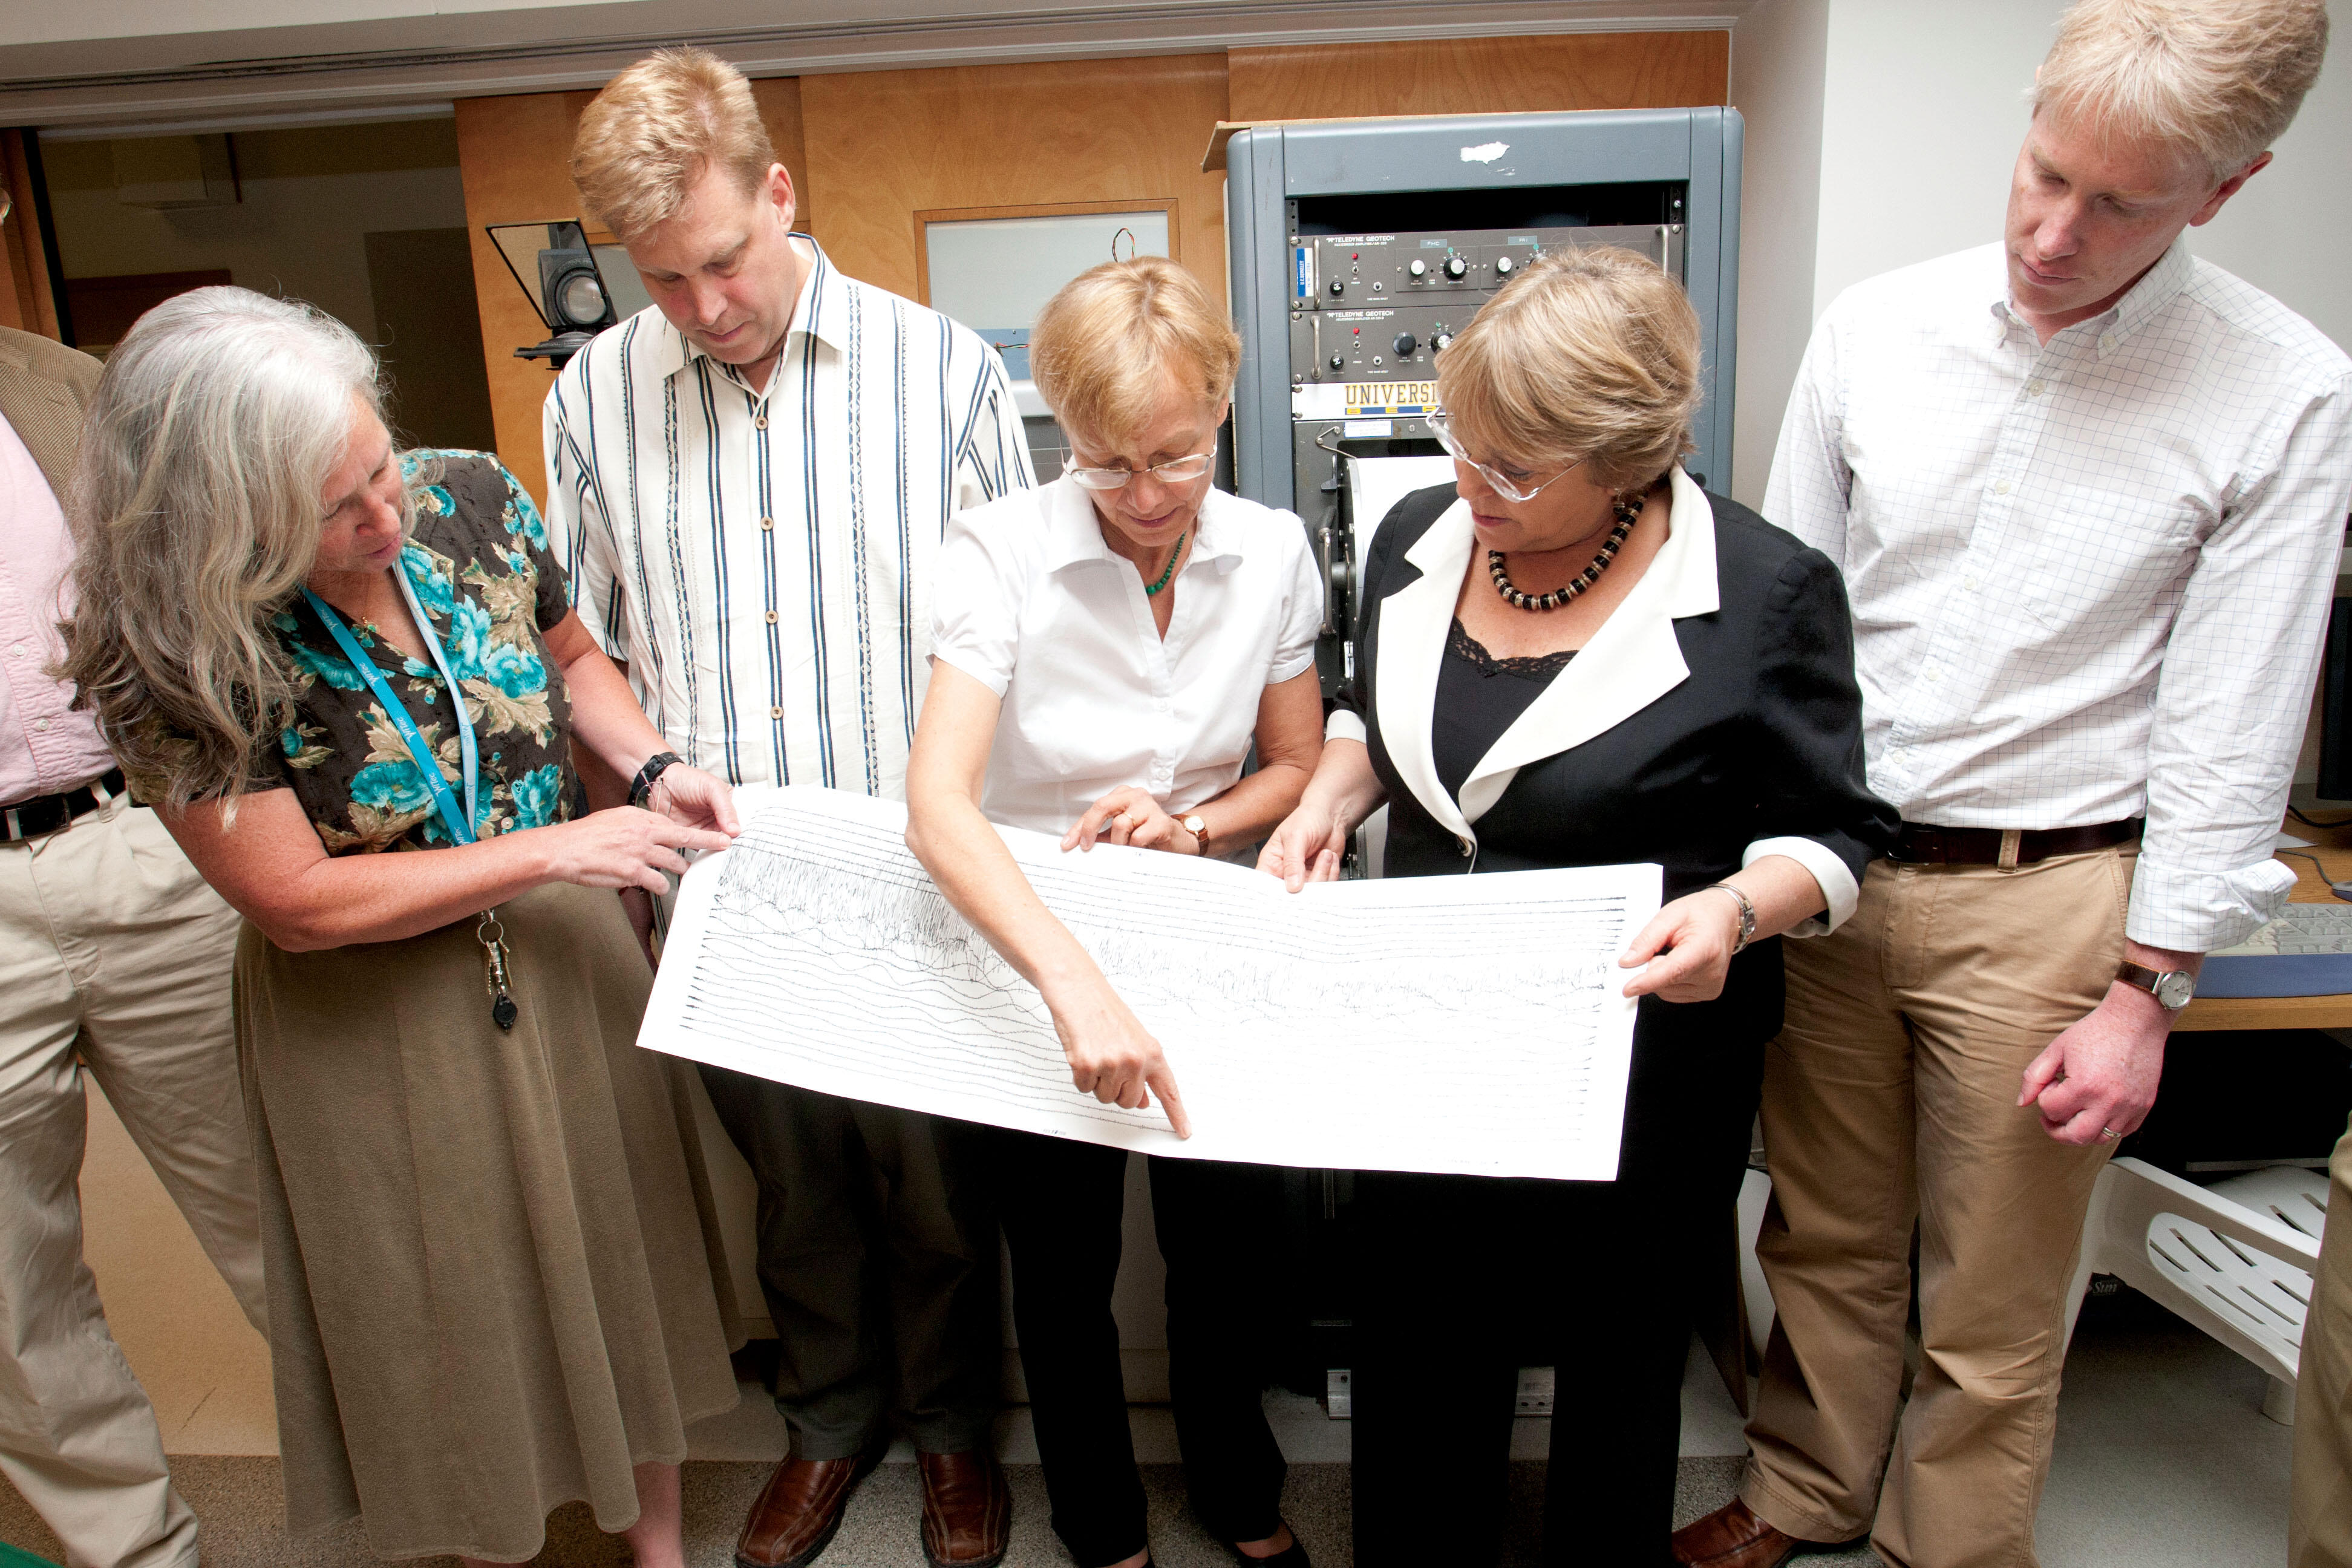 Michelle Bachelet with Barbara Romanowicz, director of UC Berkeley’s Seismological Lab, examining a seismographic record of the 2010 Chilean earthquake. (Photo by Jim Block.)